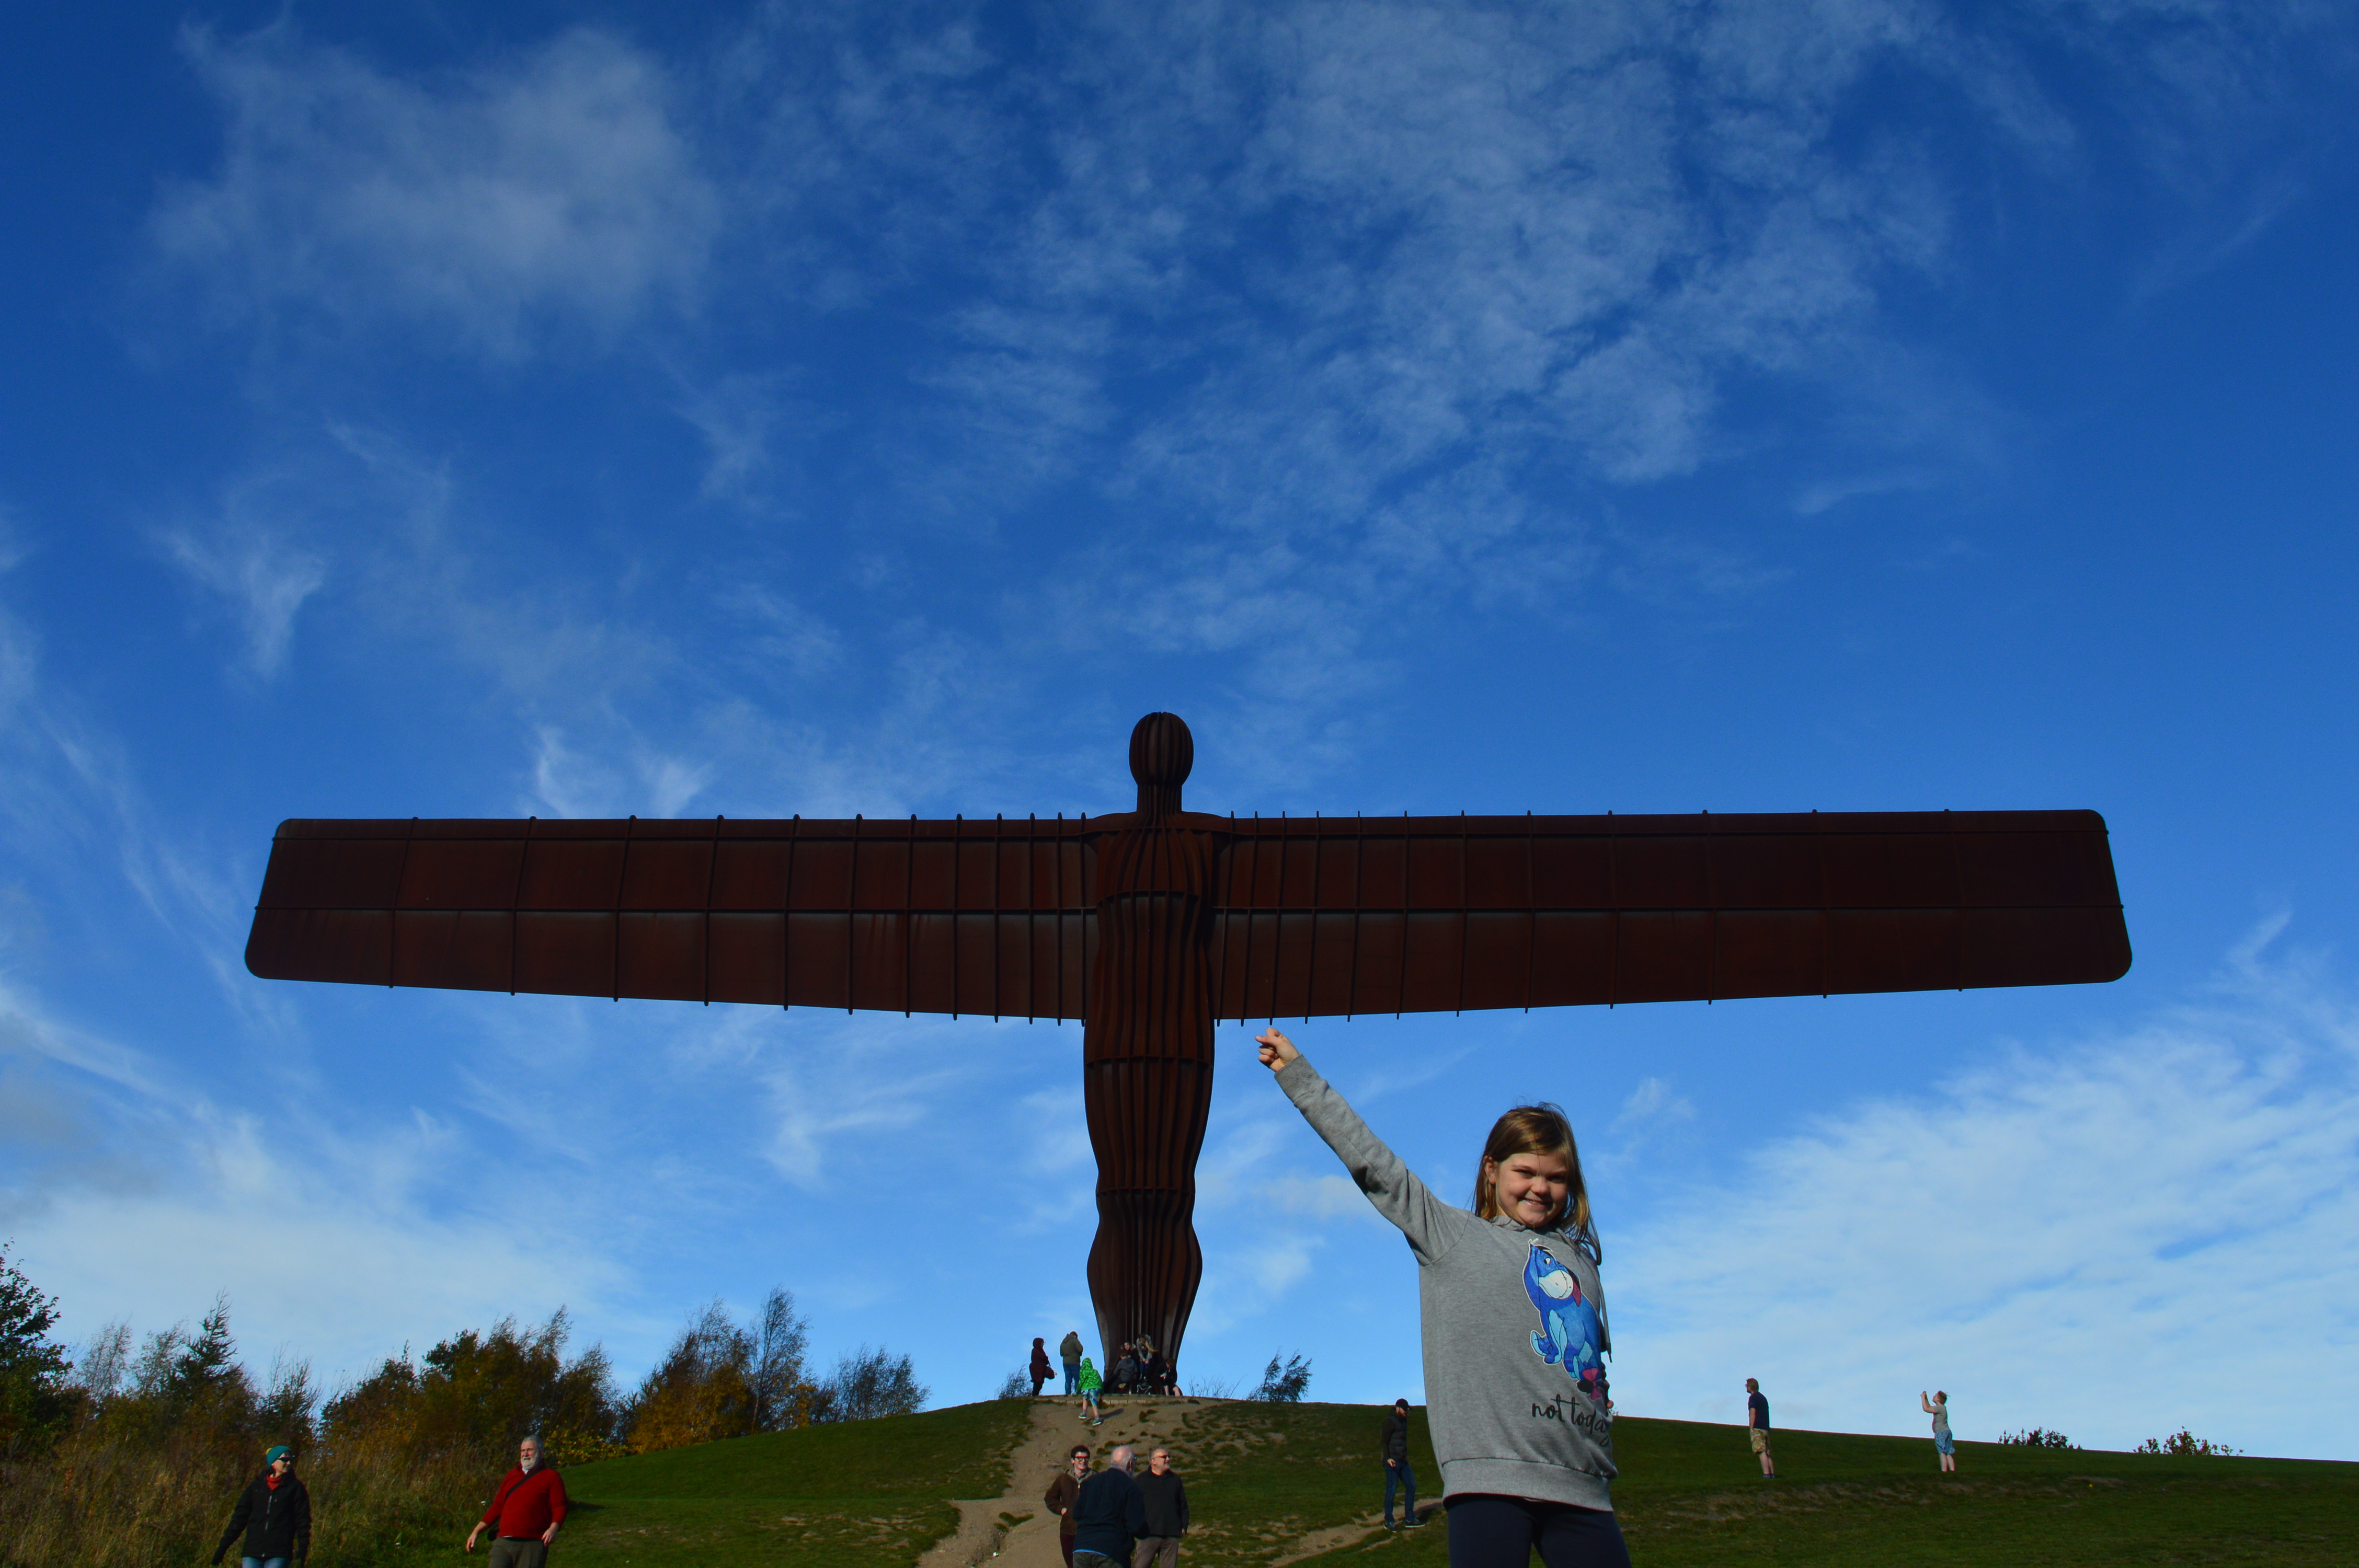 A day trip to Newcastle with a stop at the Angel of the north